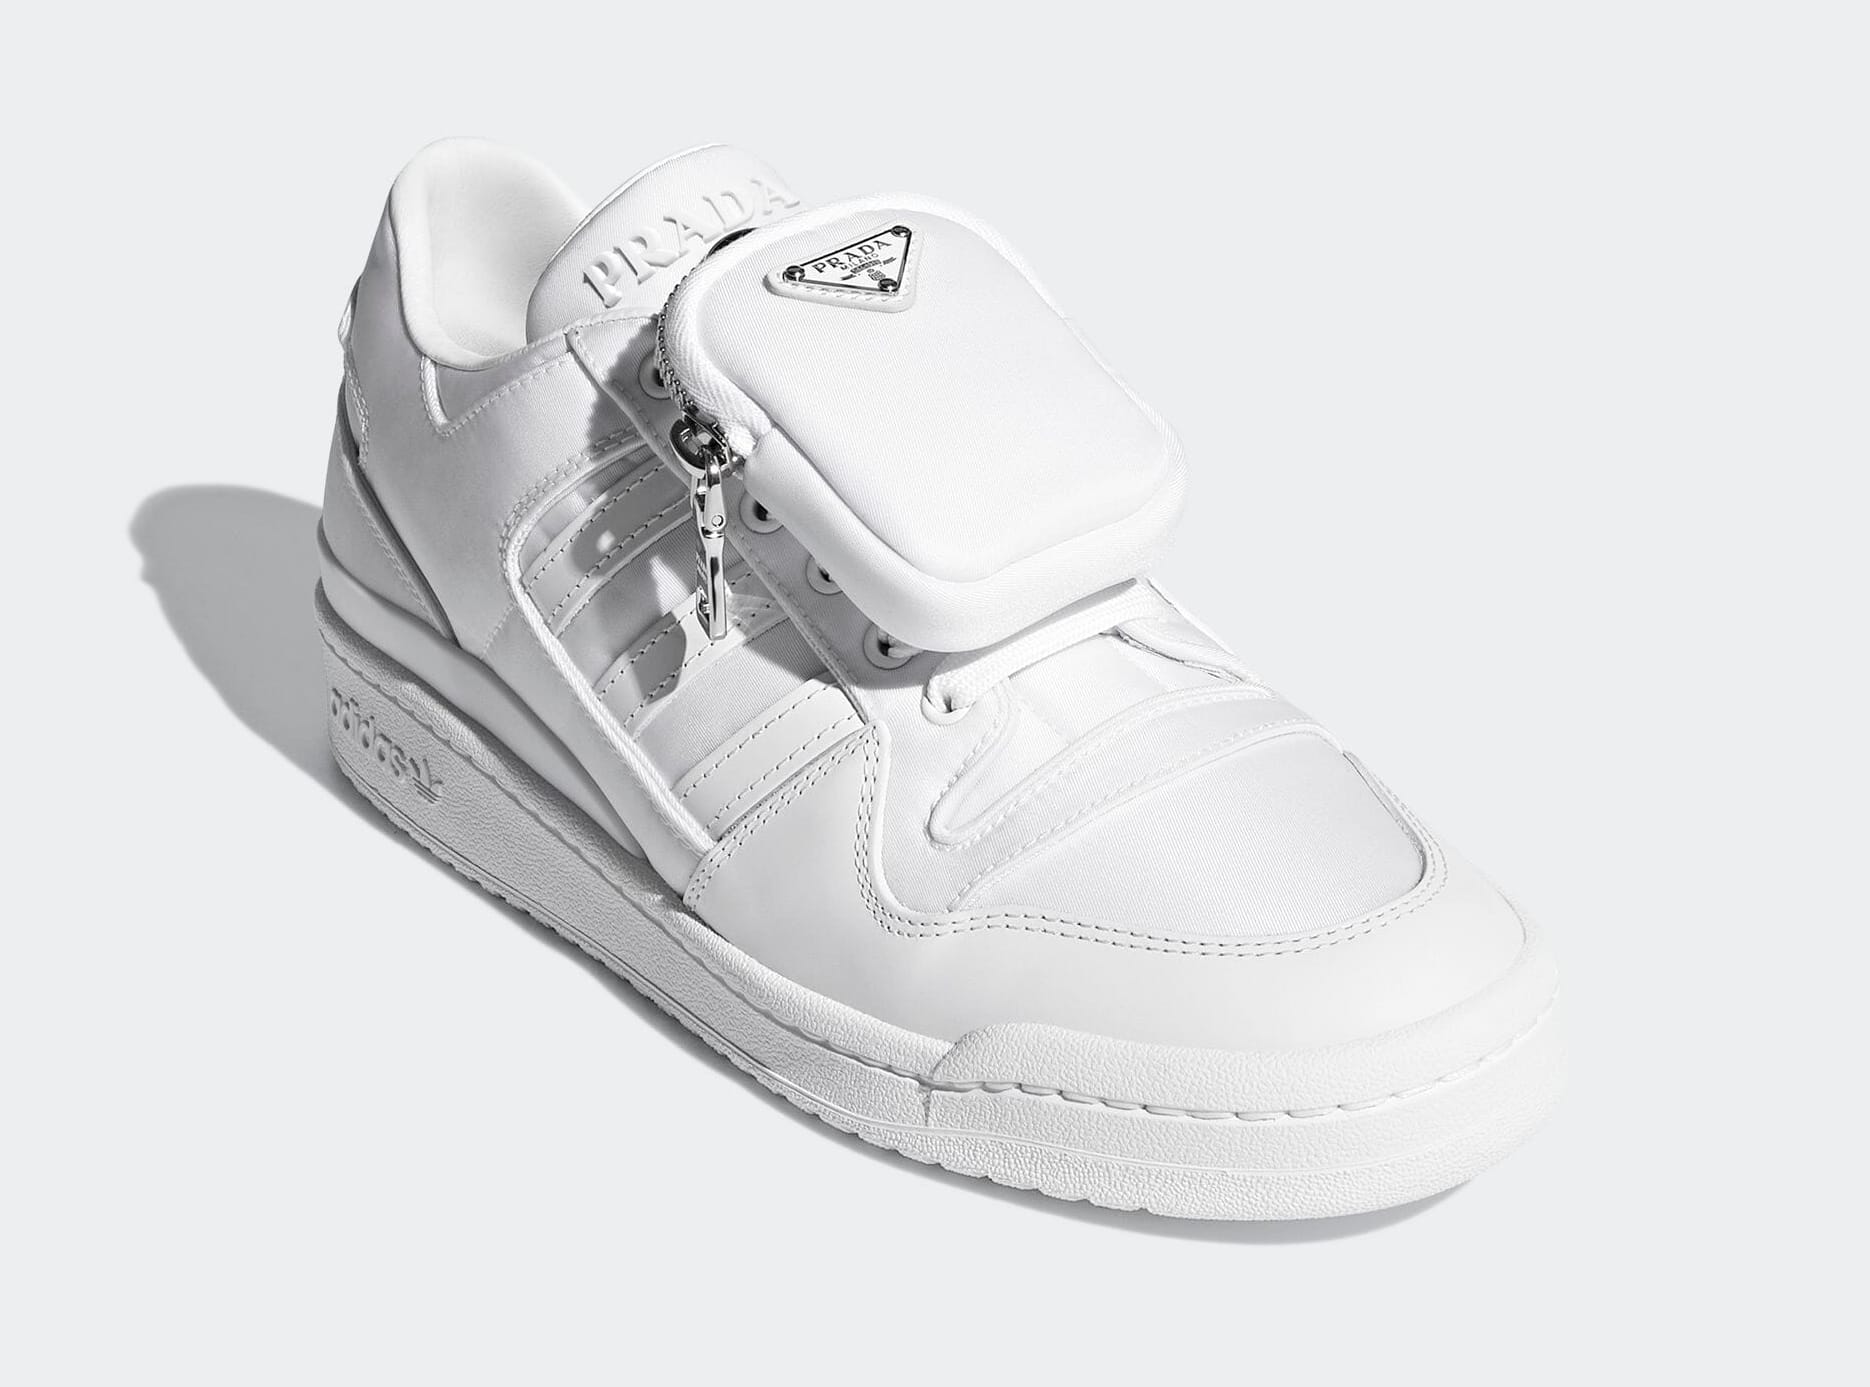 Prada x Adidas Forum Low and High Release Date Jan. 2022 | Sole 